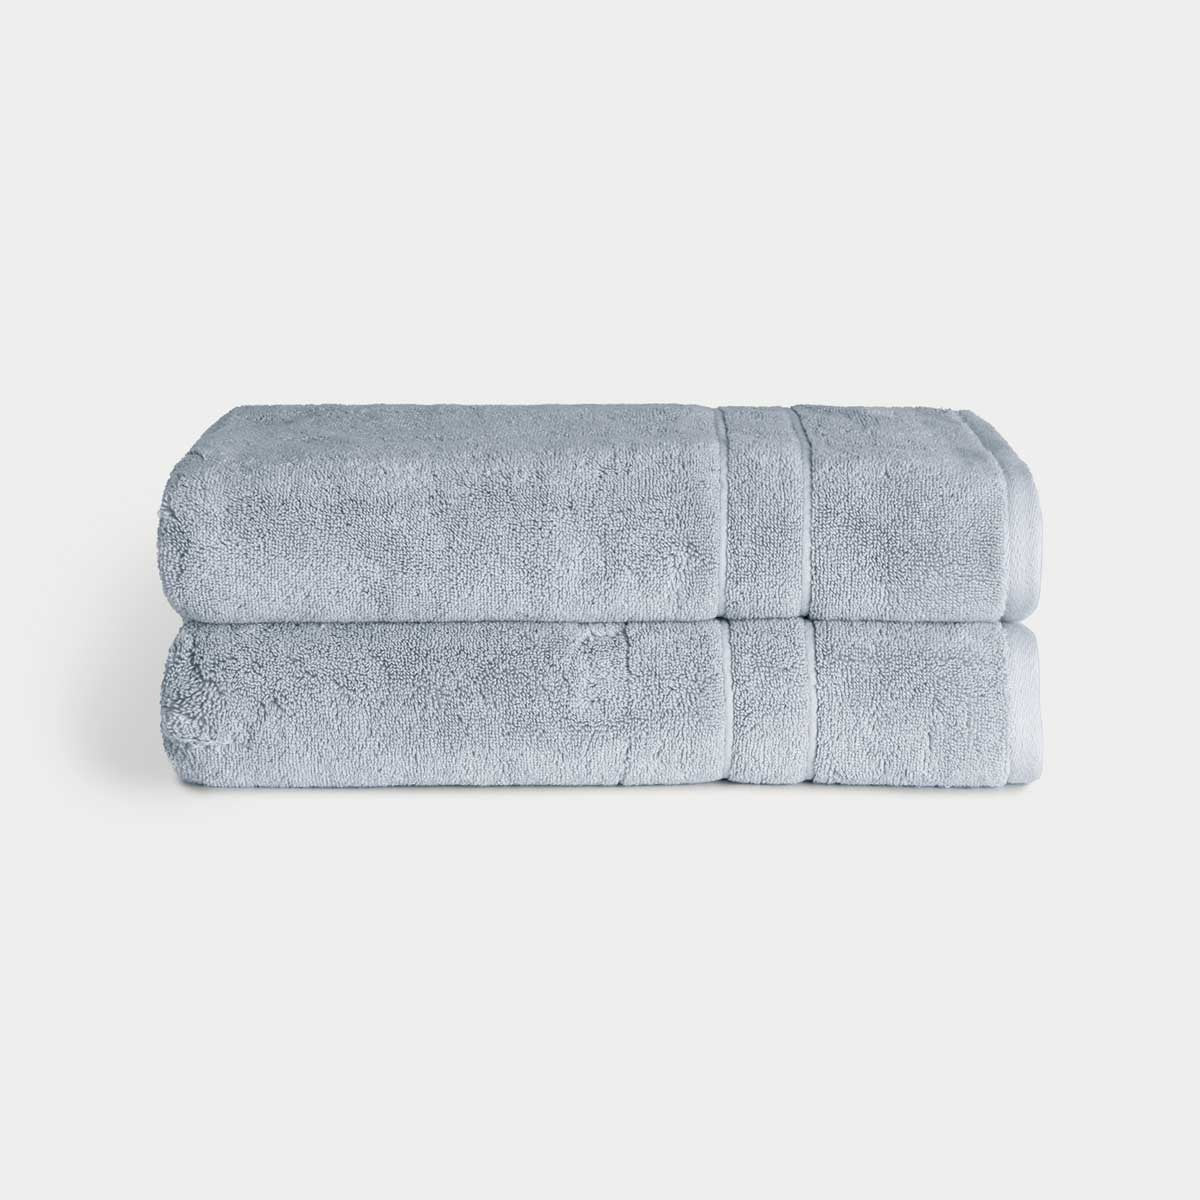 Premium Plush Bath Towels in the color Harbor Mist. Photo of bath towels taken with white background 